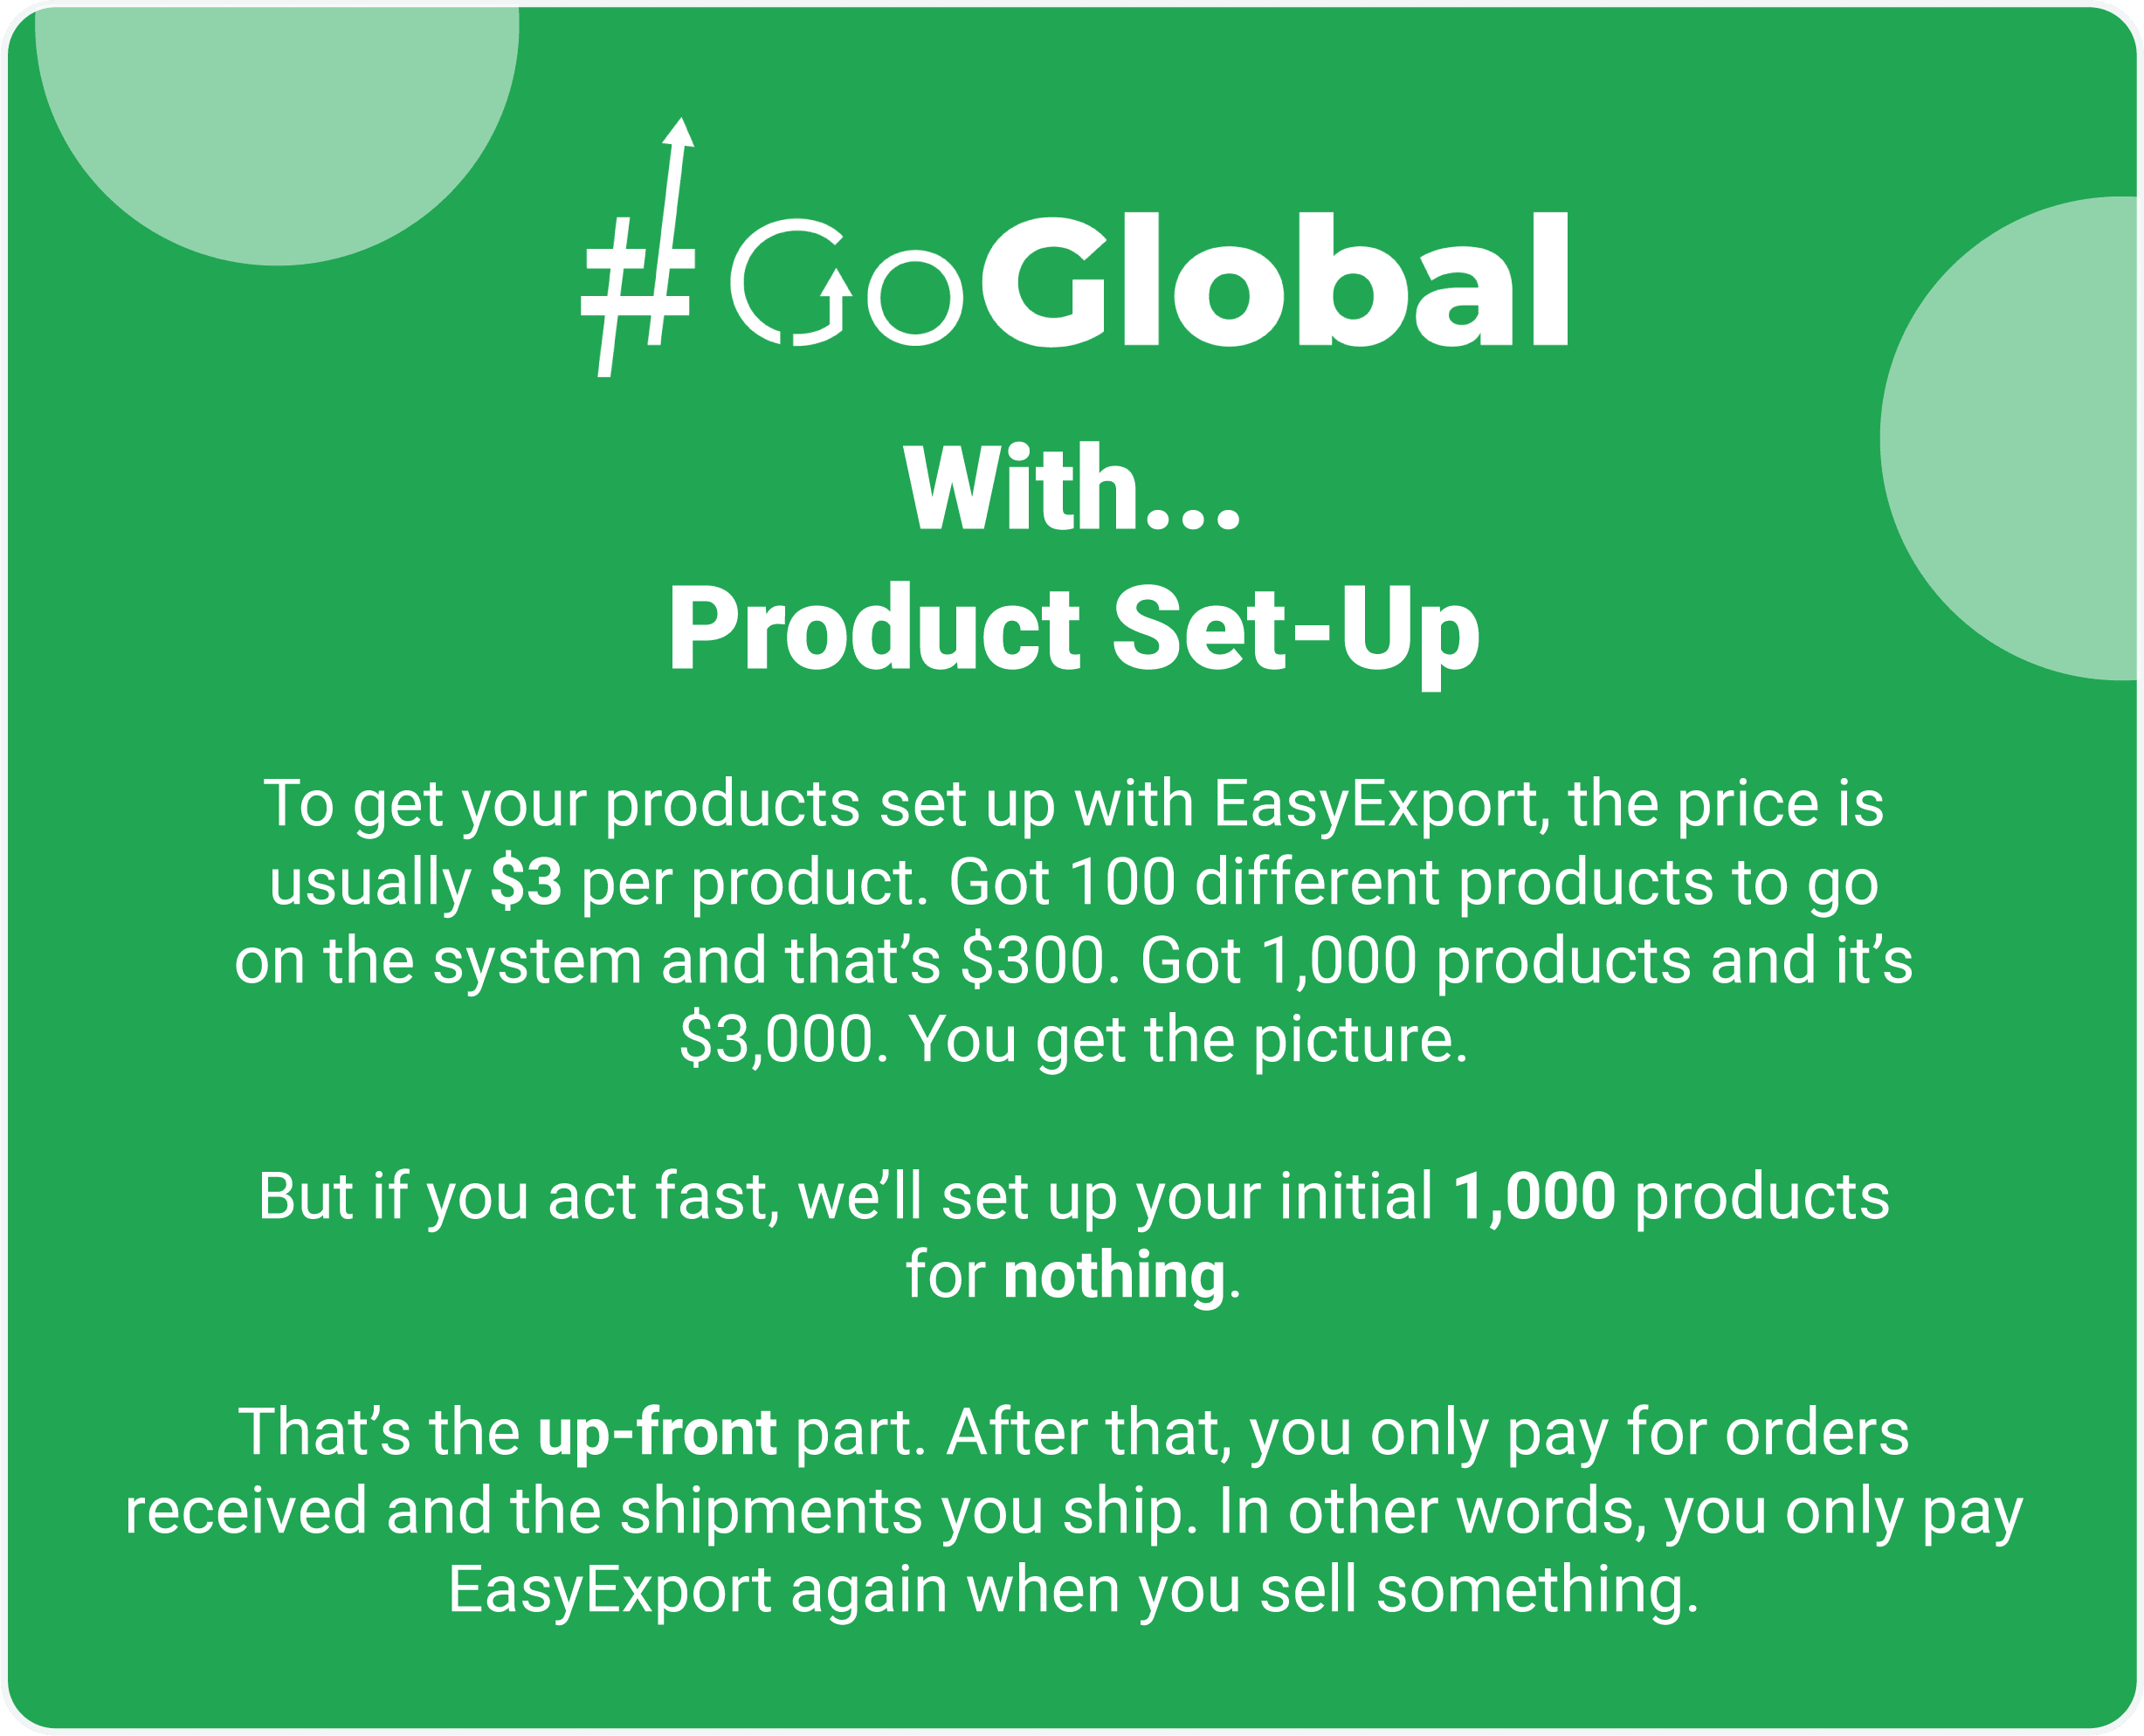 EasyExport - GoGlobal - American Sellers - Product Set-up